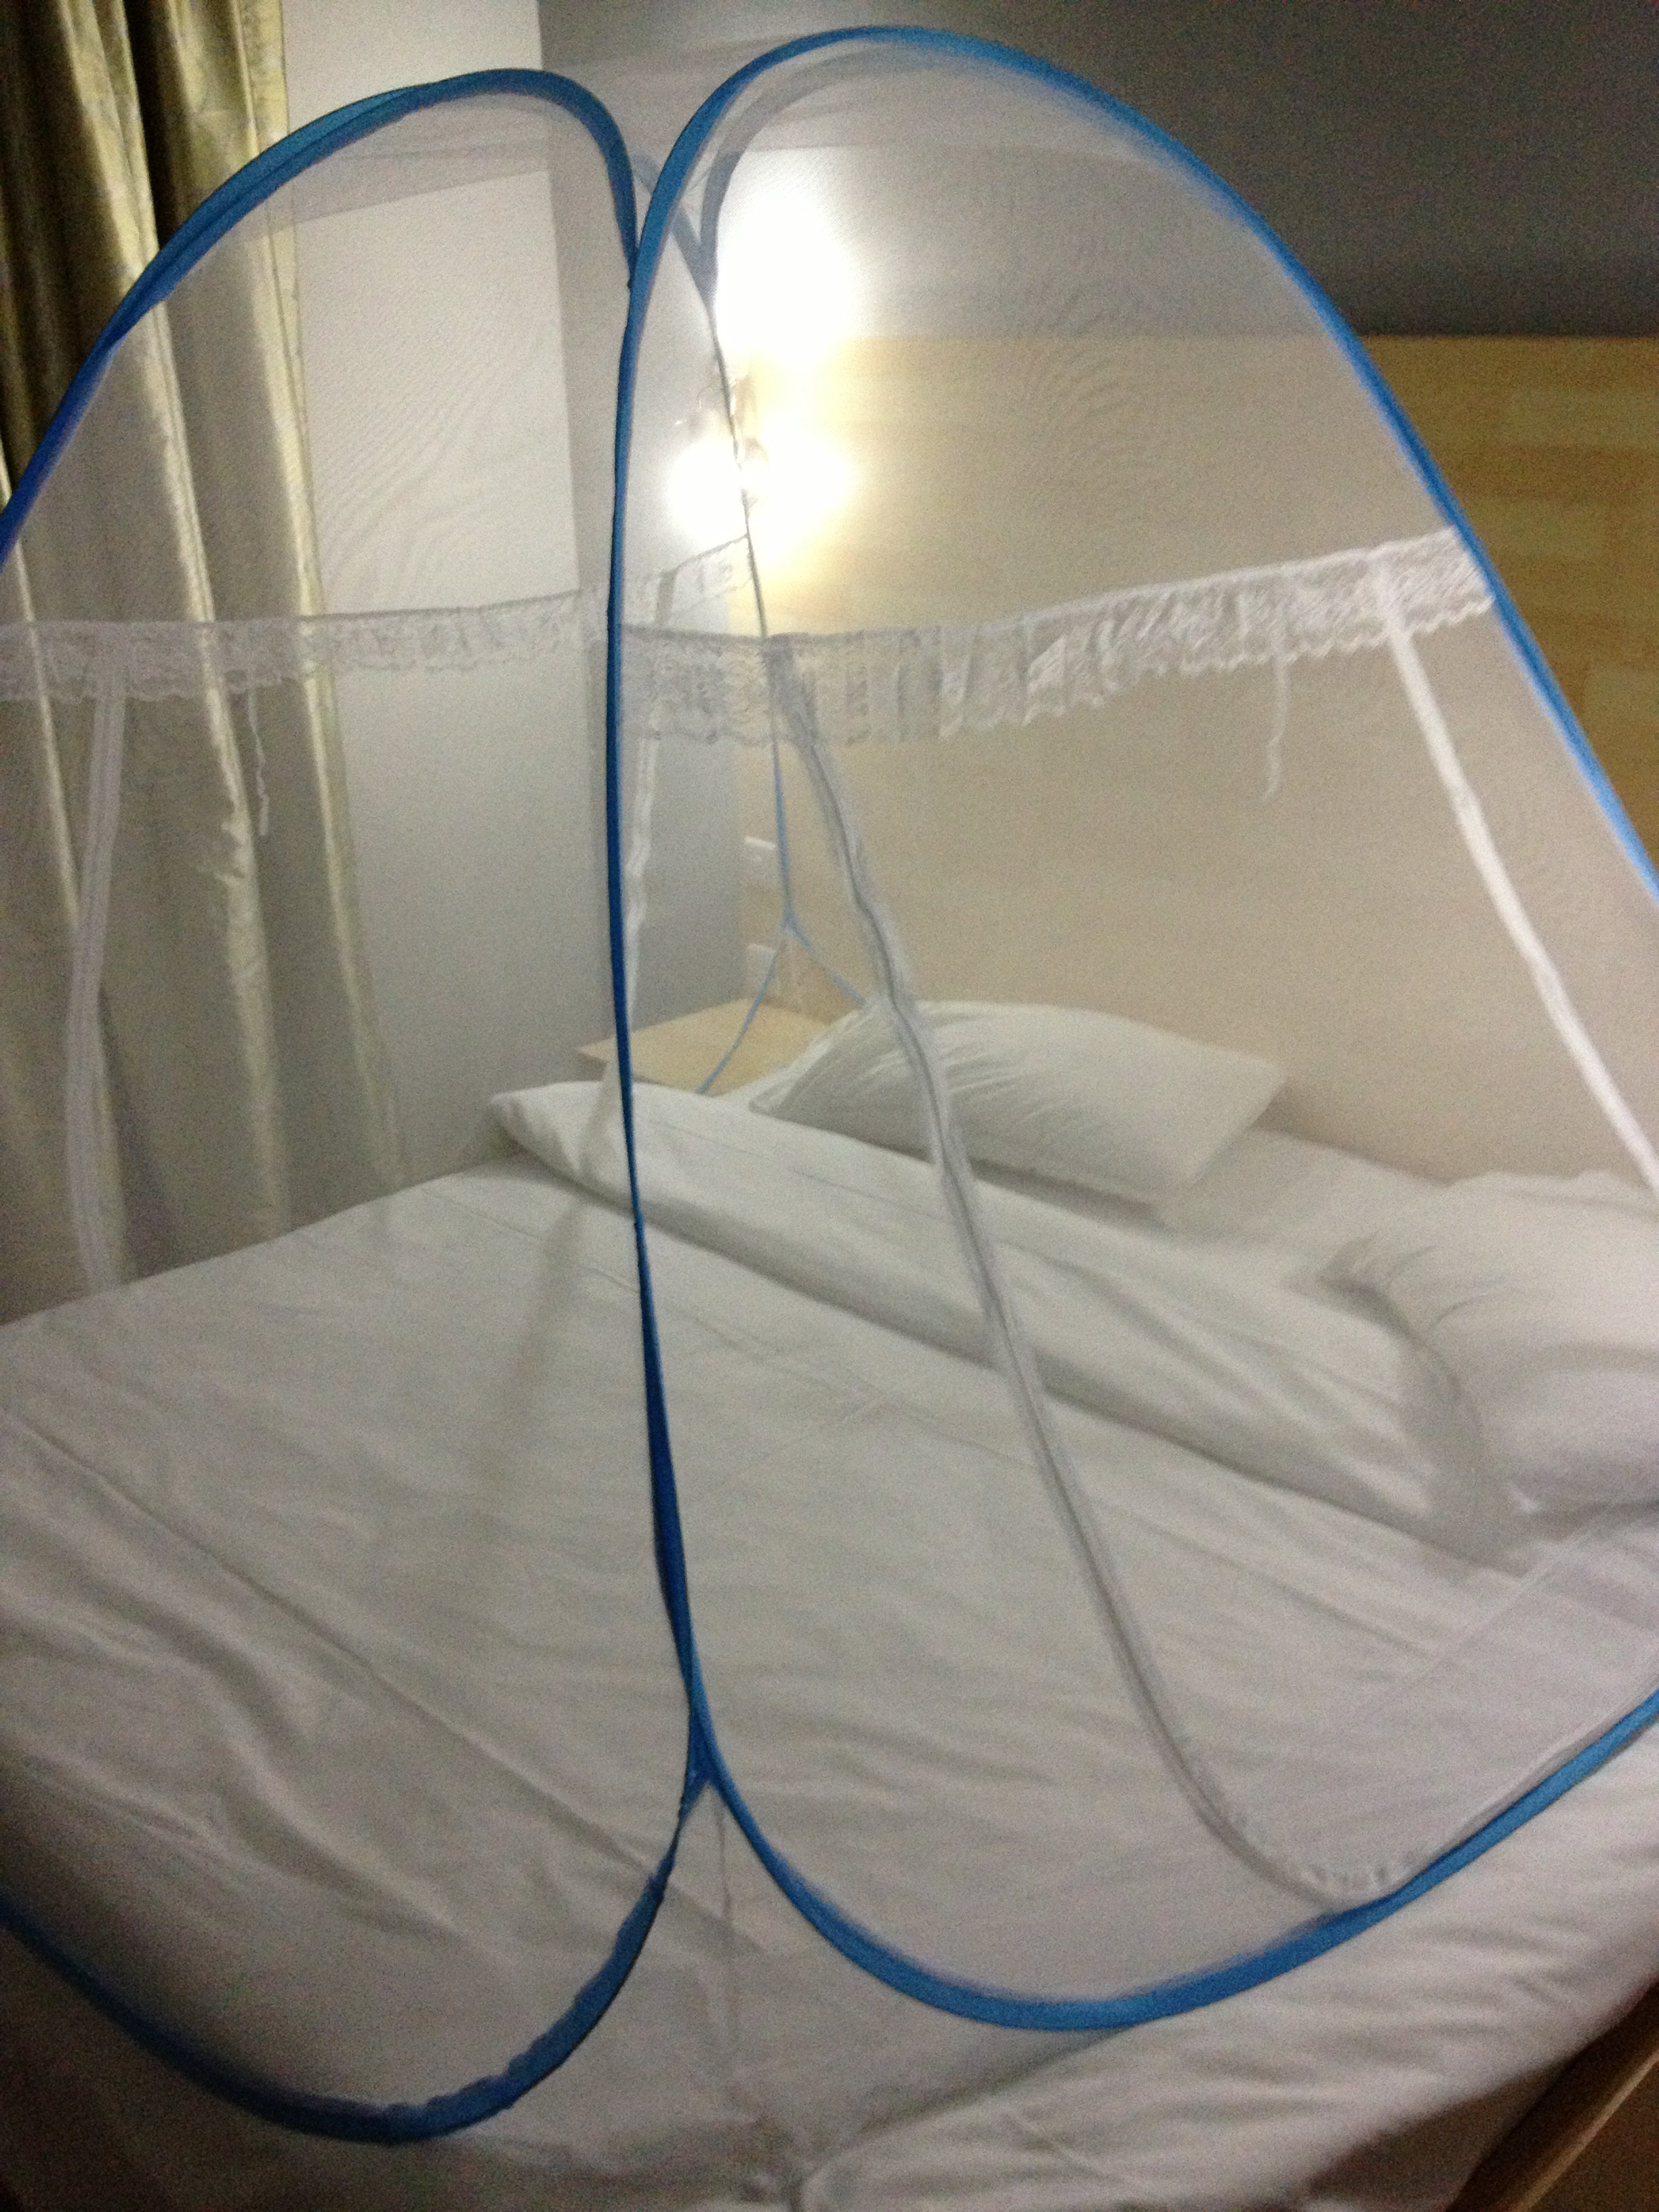 Mosquito net over the bed...it reminds me of my G.I. Joe tent as a child :)